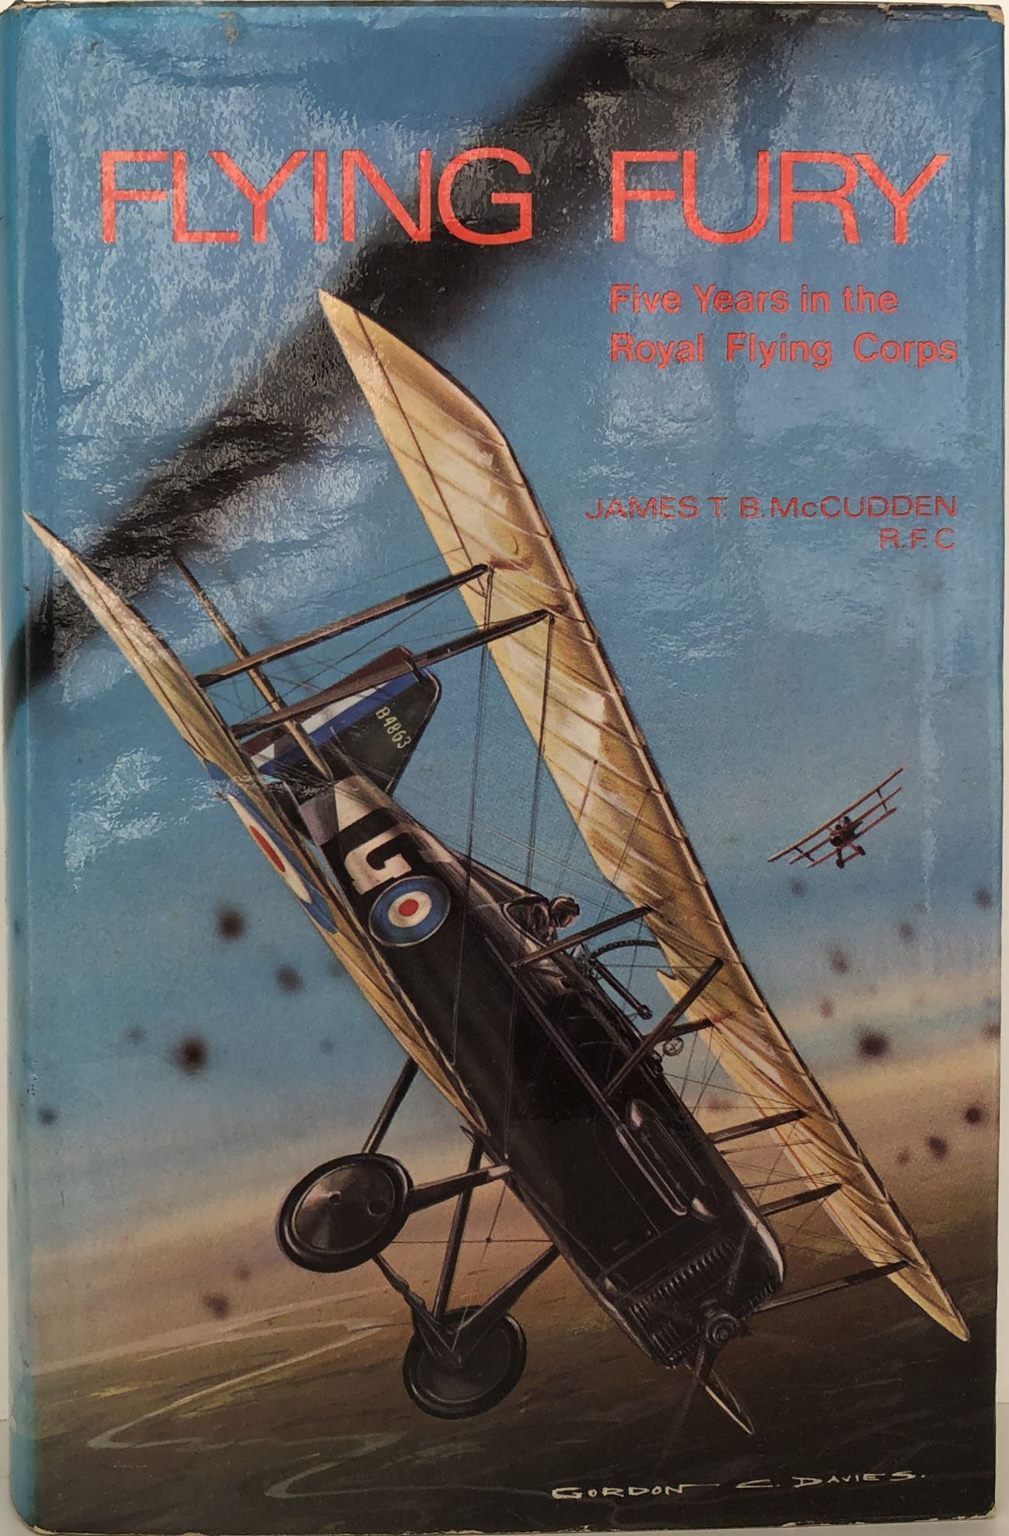 FLYING FURY: Five Years in the Royal Flying Corps